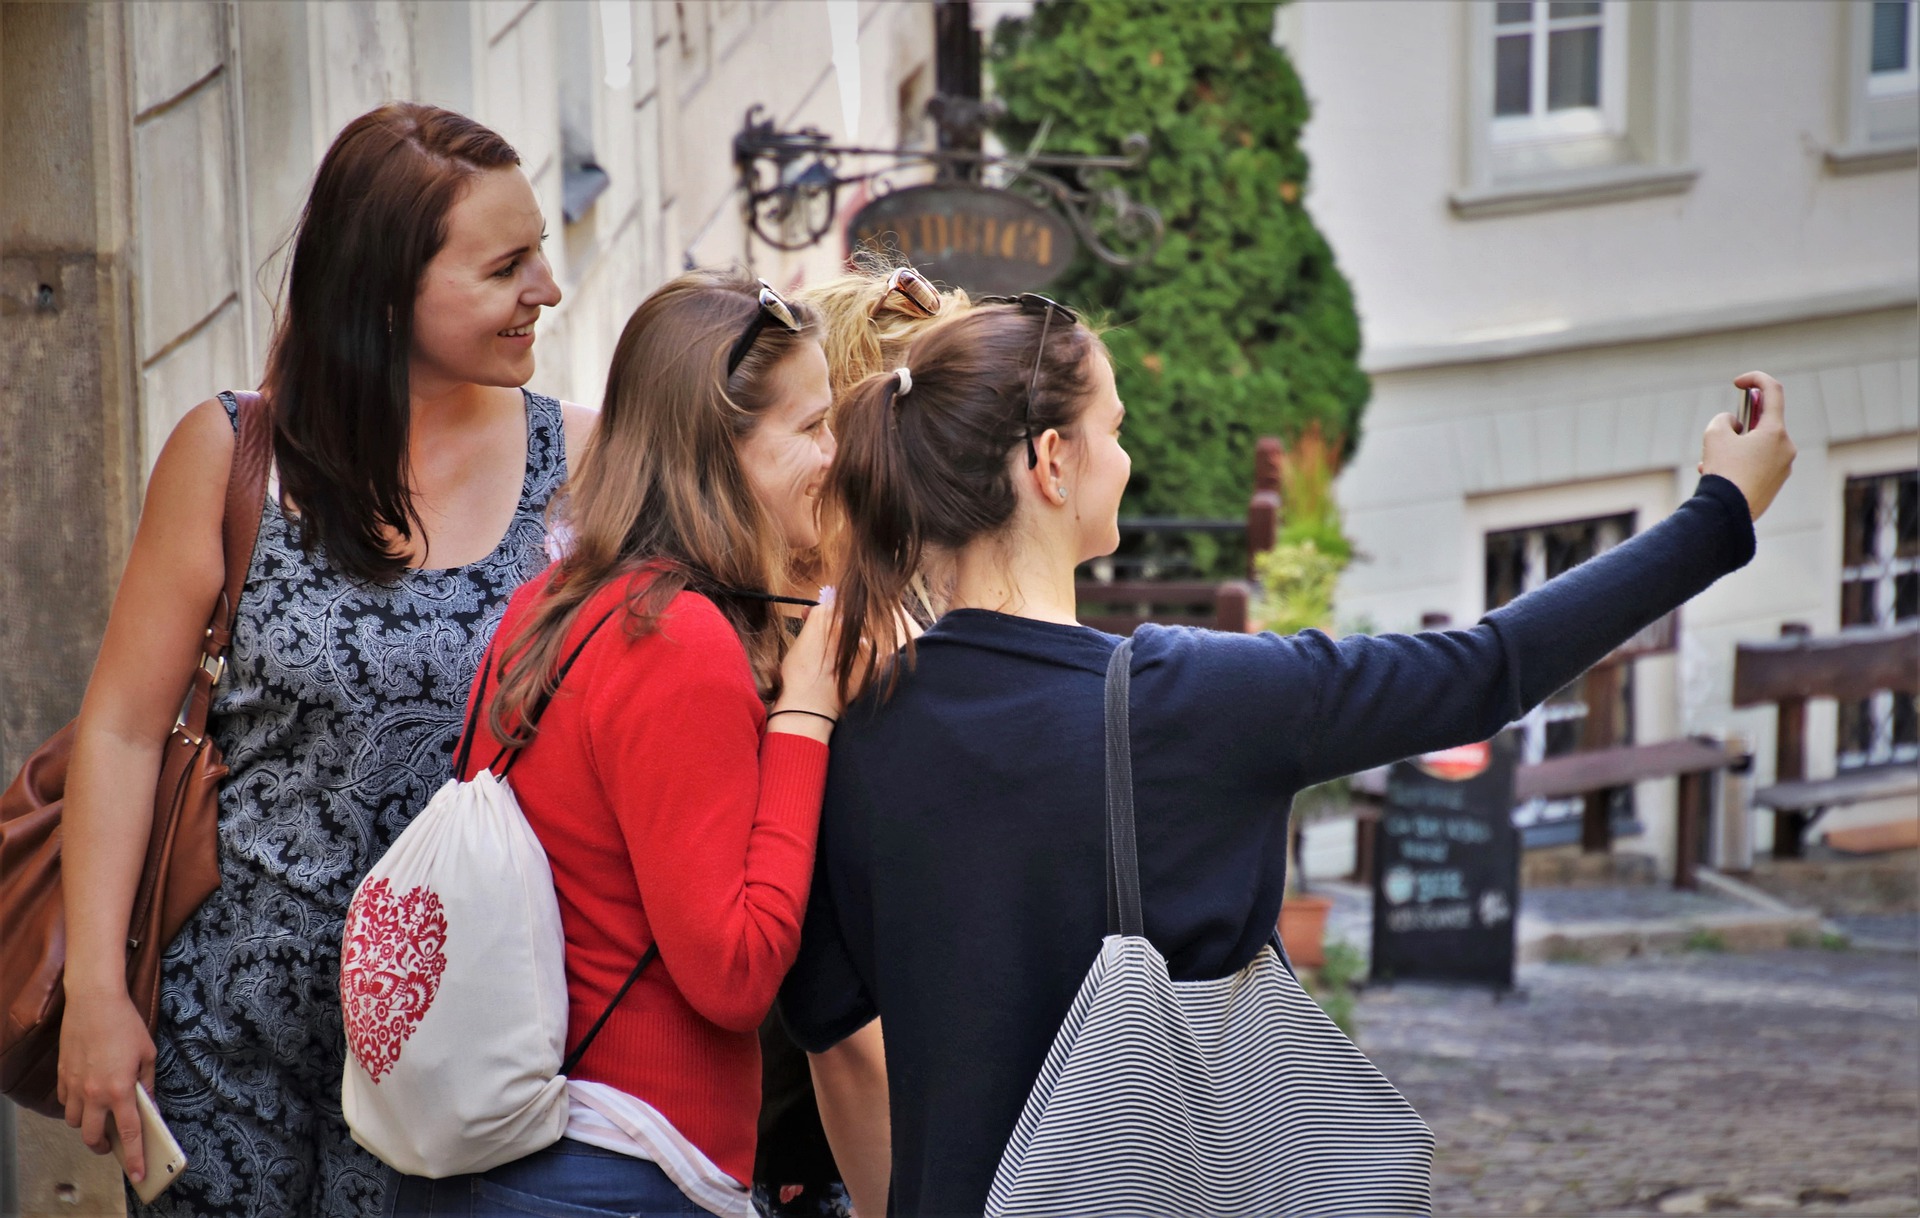 Girls taking a selfie in an old town